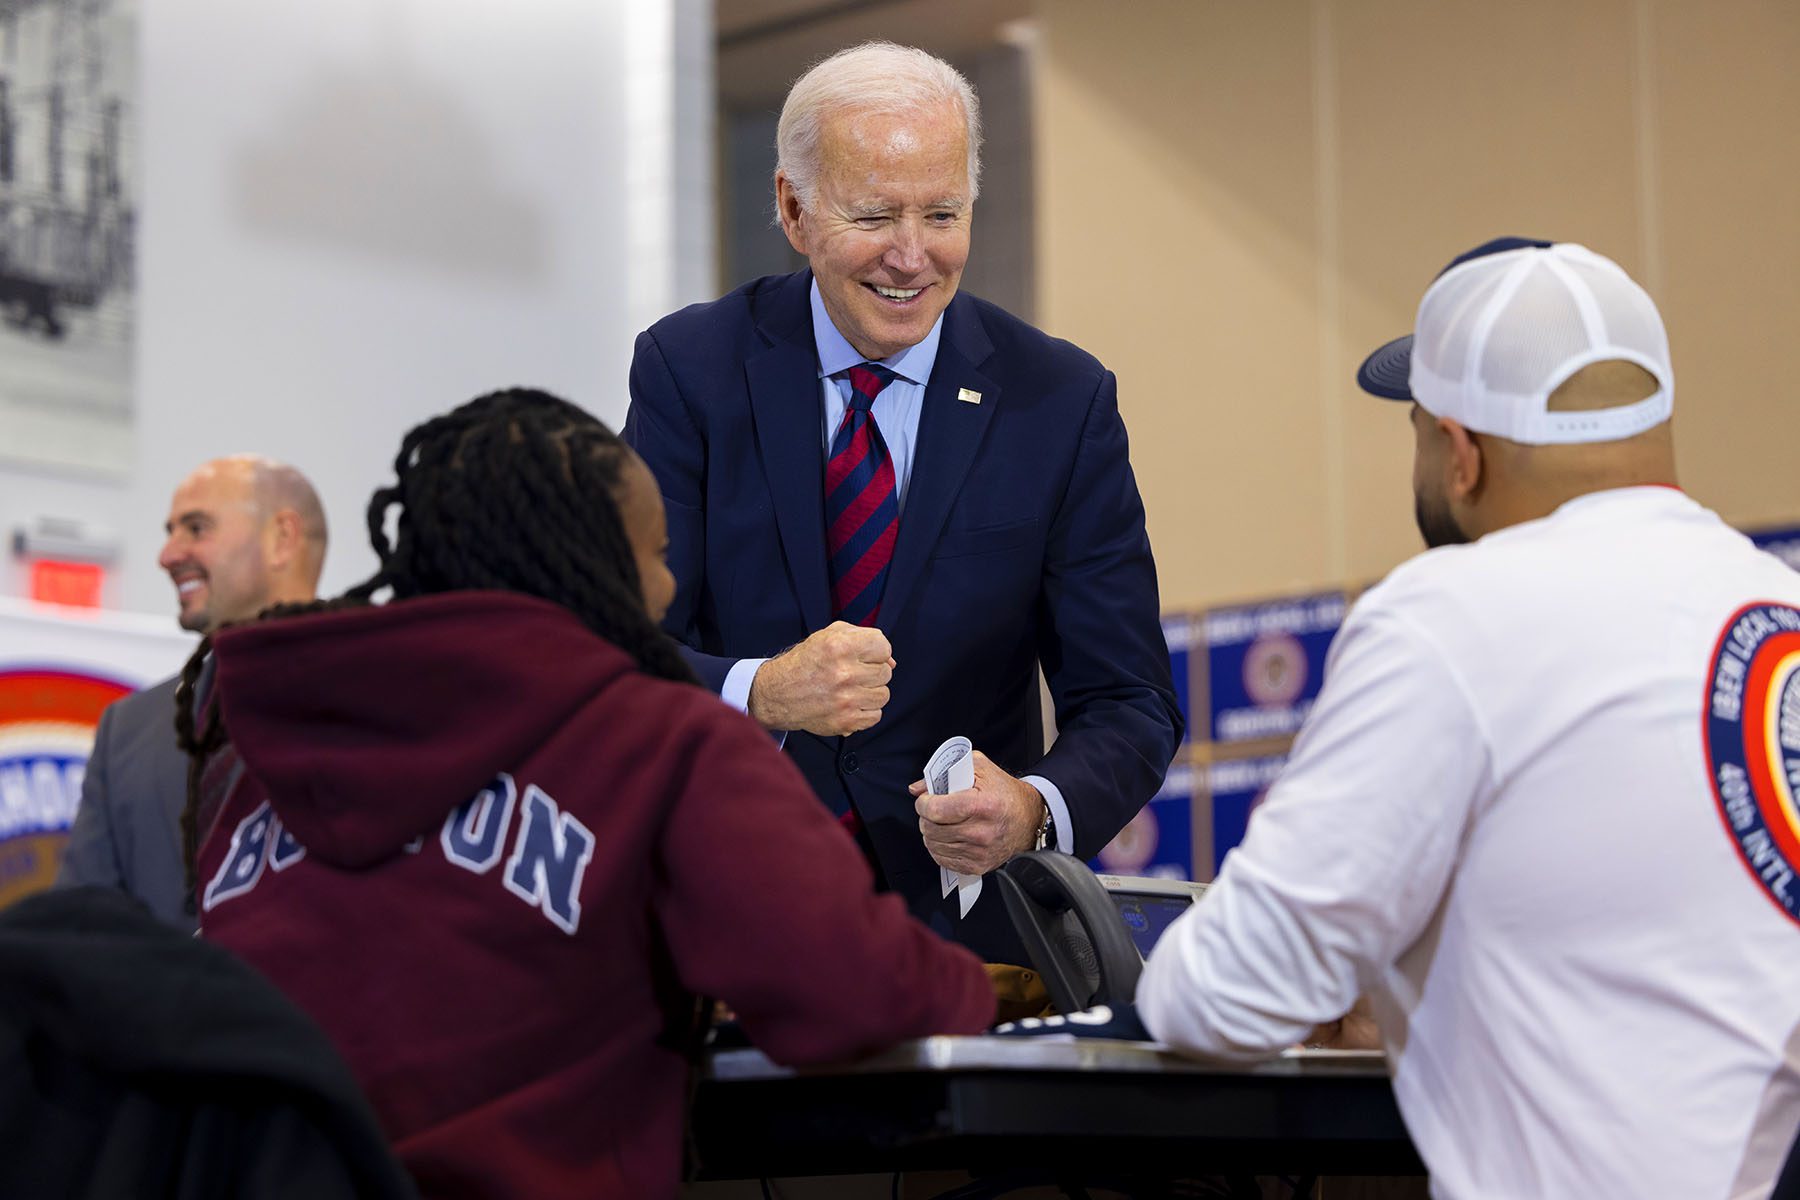 President Biden greets volunteers at a phone banking event for Sen. Warnock's re-election campaign.